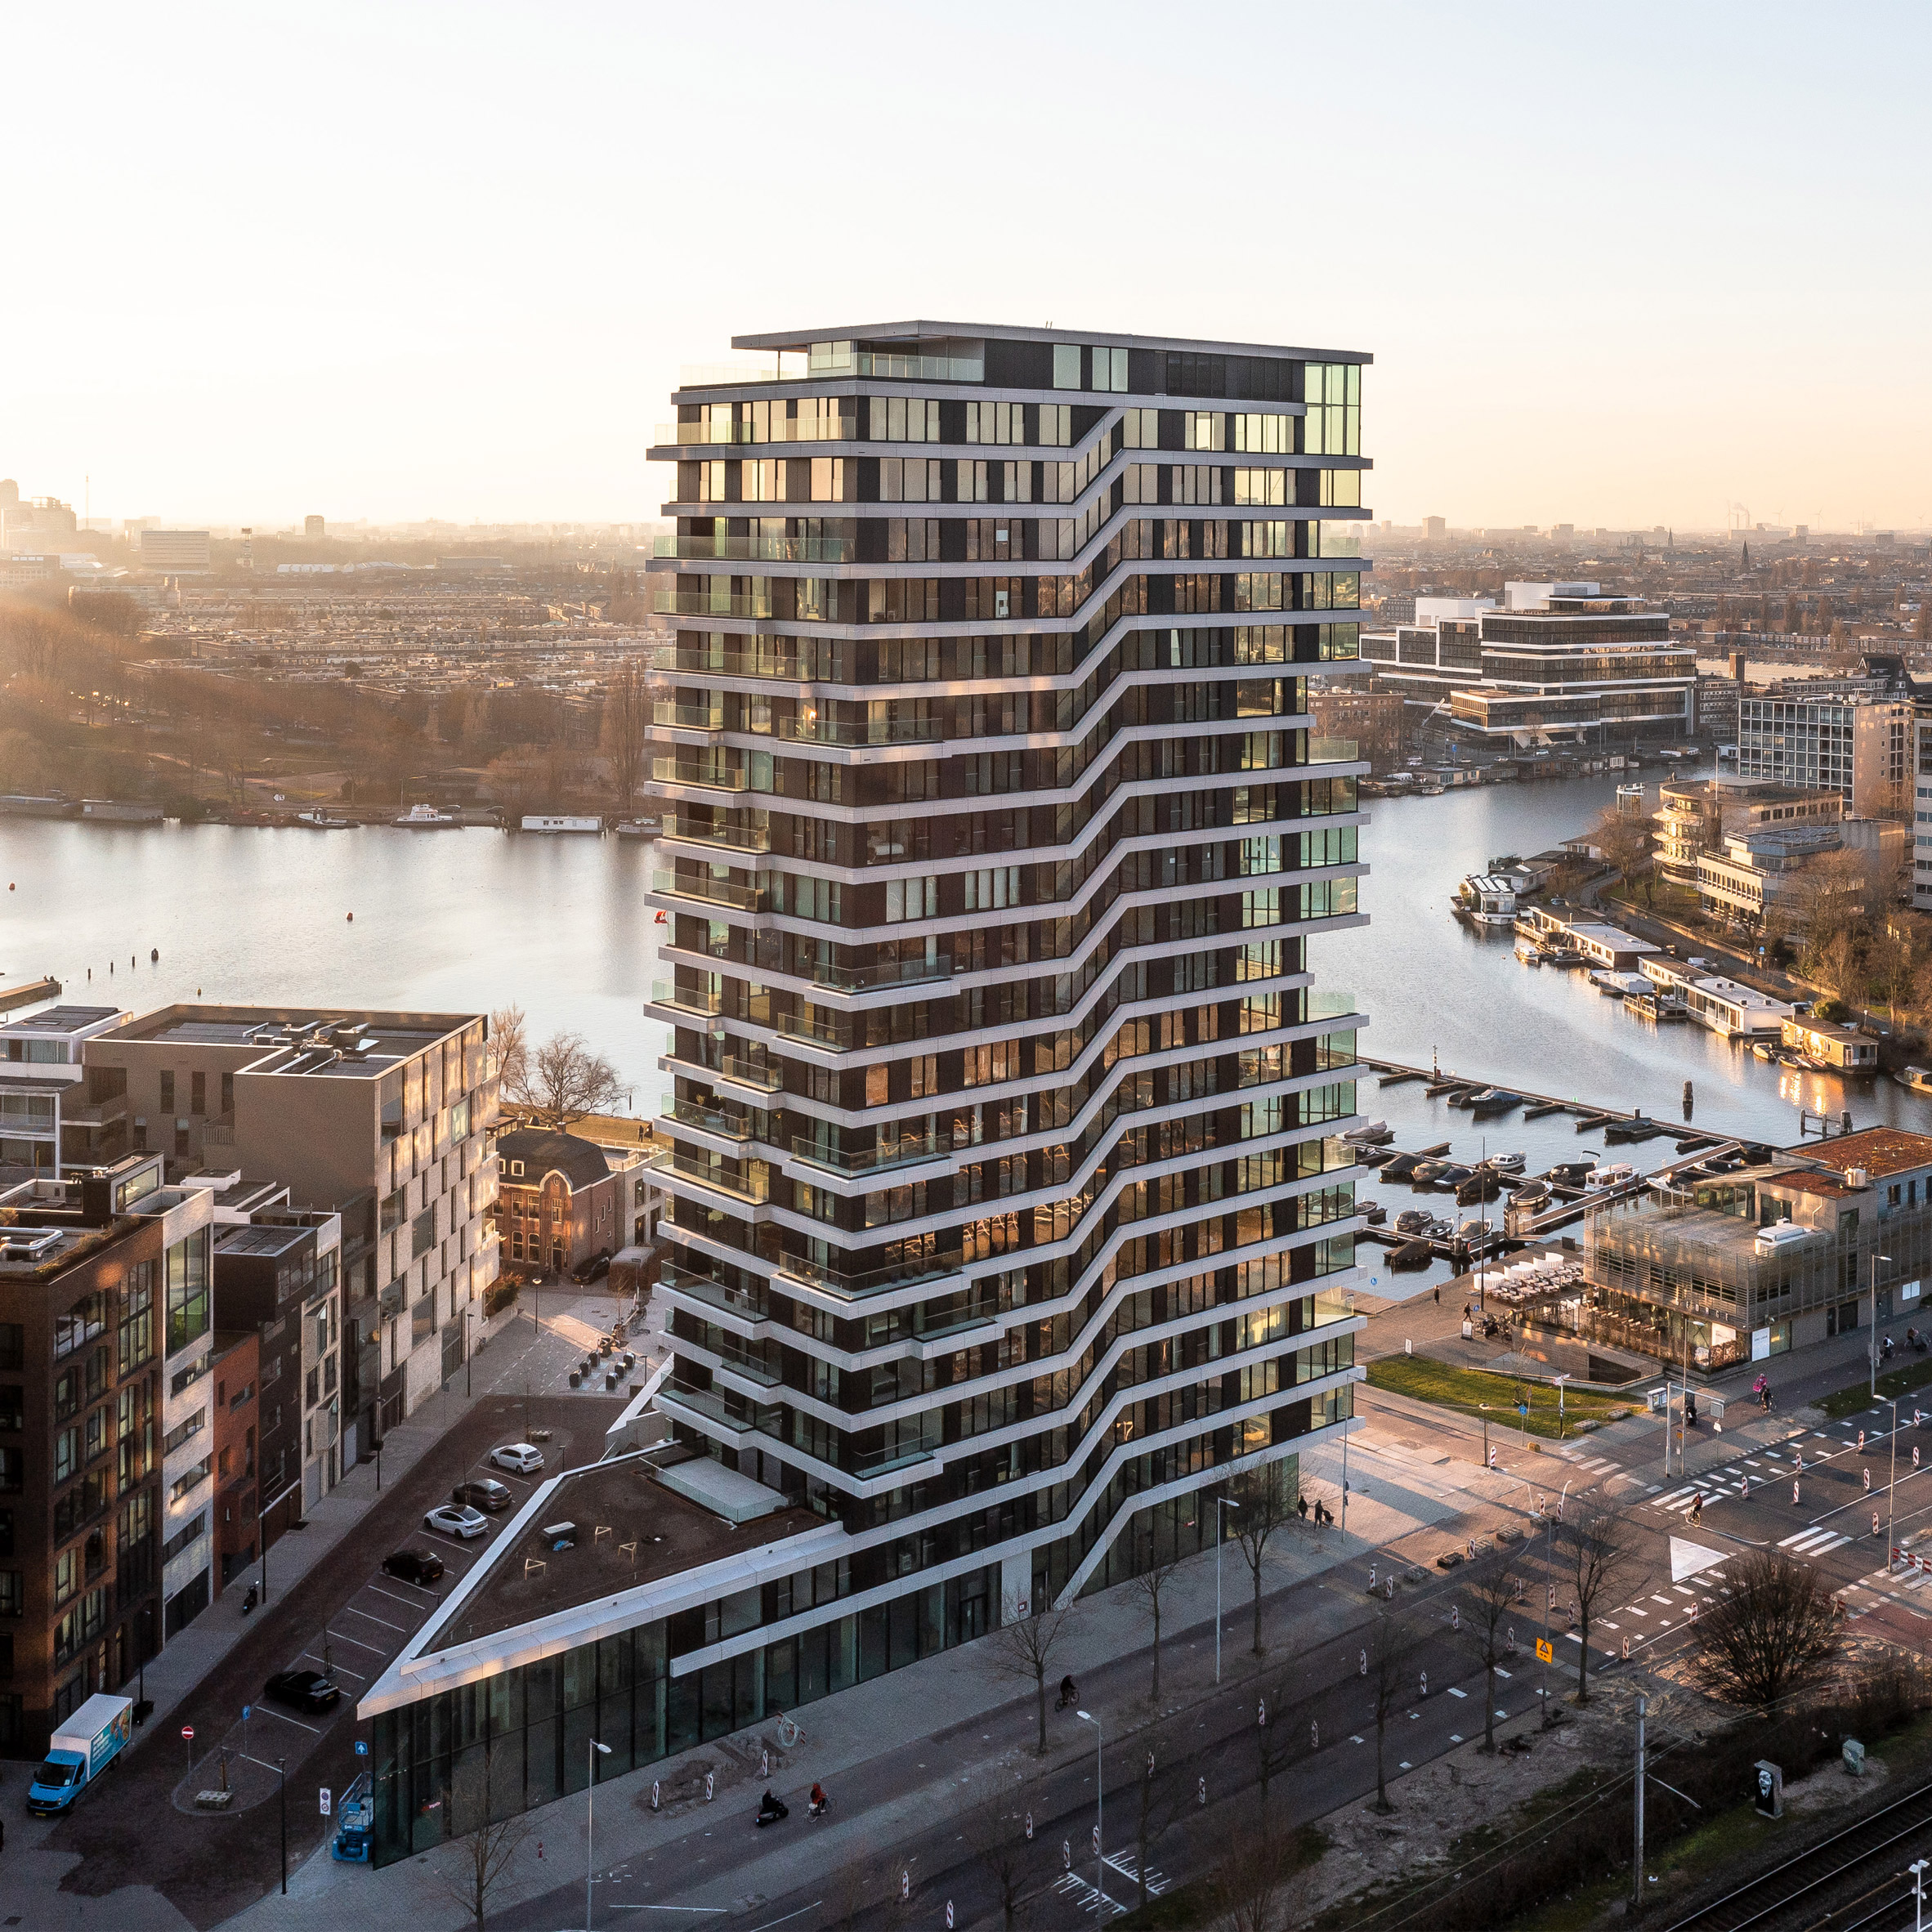 Exterior of the Haut mass-timber high-rise building in Amsterdam by the waterfront